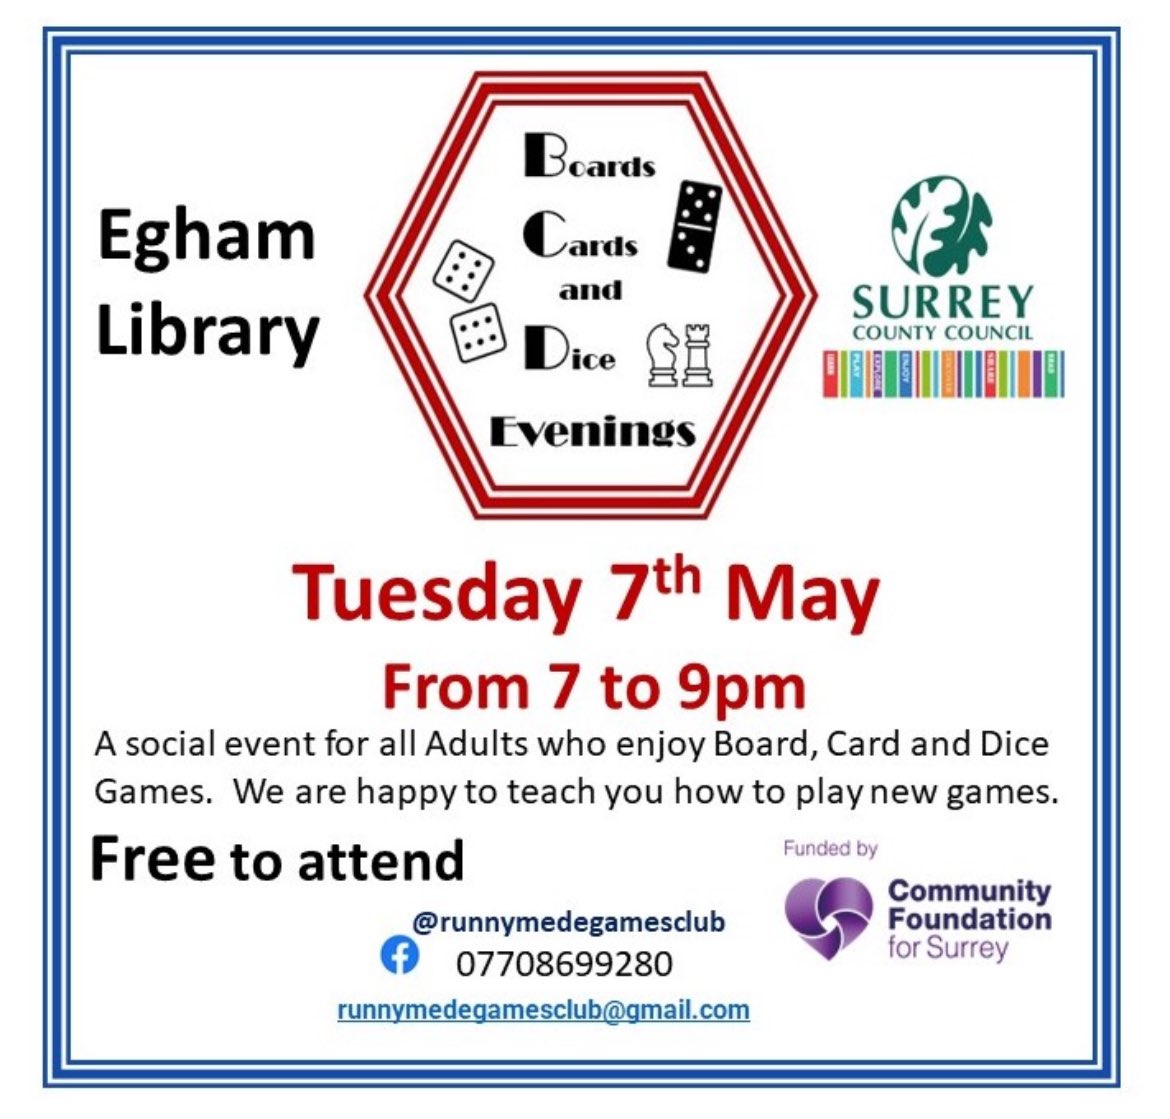 Our next Boards, Cards and Dice evening at @EghamLib will take place on Tuesday 7th May from 7pm - 9pm. This event is free to attend for all adults interested in table top games. @SurreyLibraries #Runnymedegamesclub